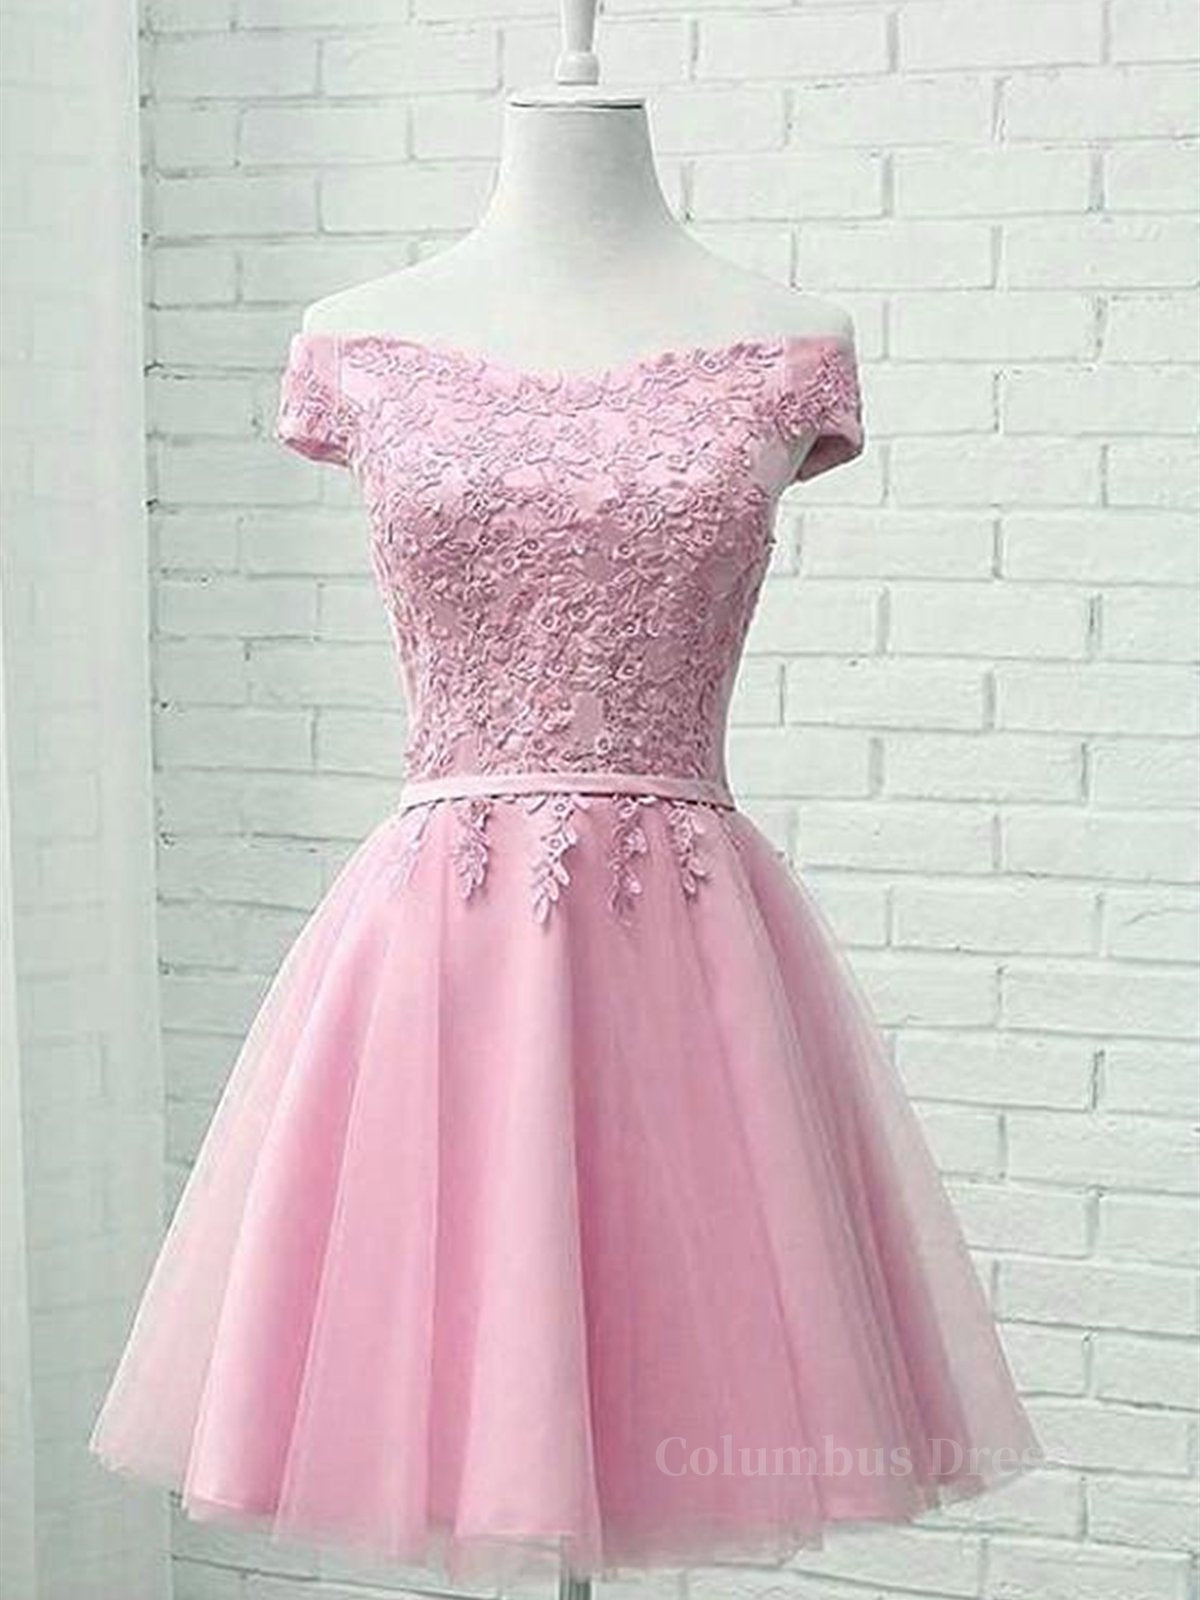 Party Dress Outfit, Cap Sleeves Short Pink Lace Prom Dresses, Short Pink Lace Formal Bridesmaid Dresses